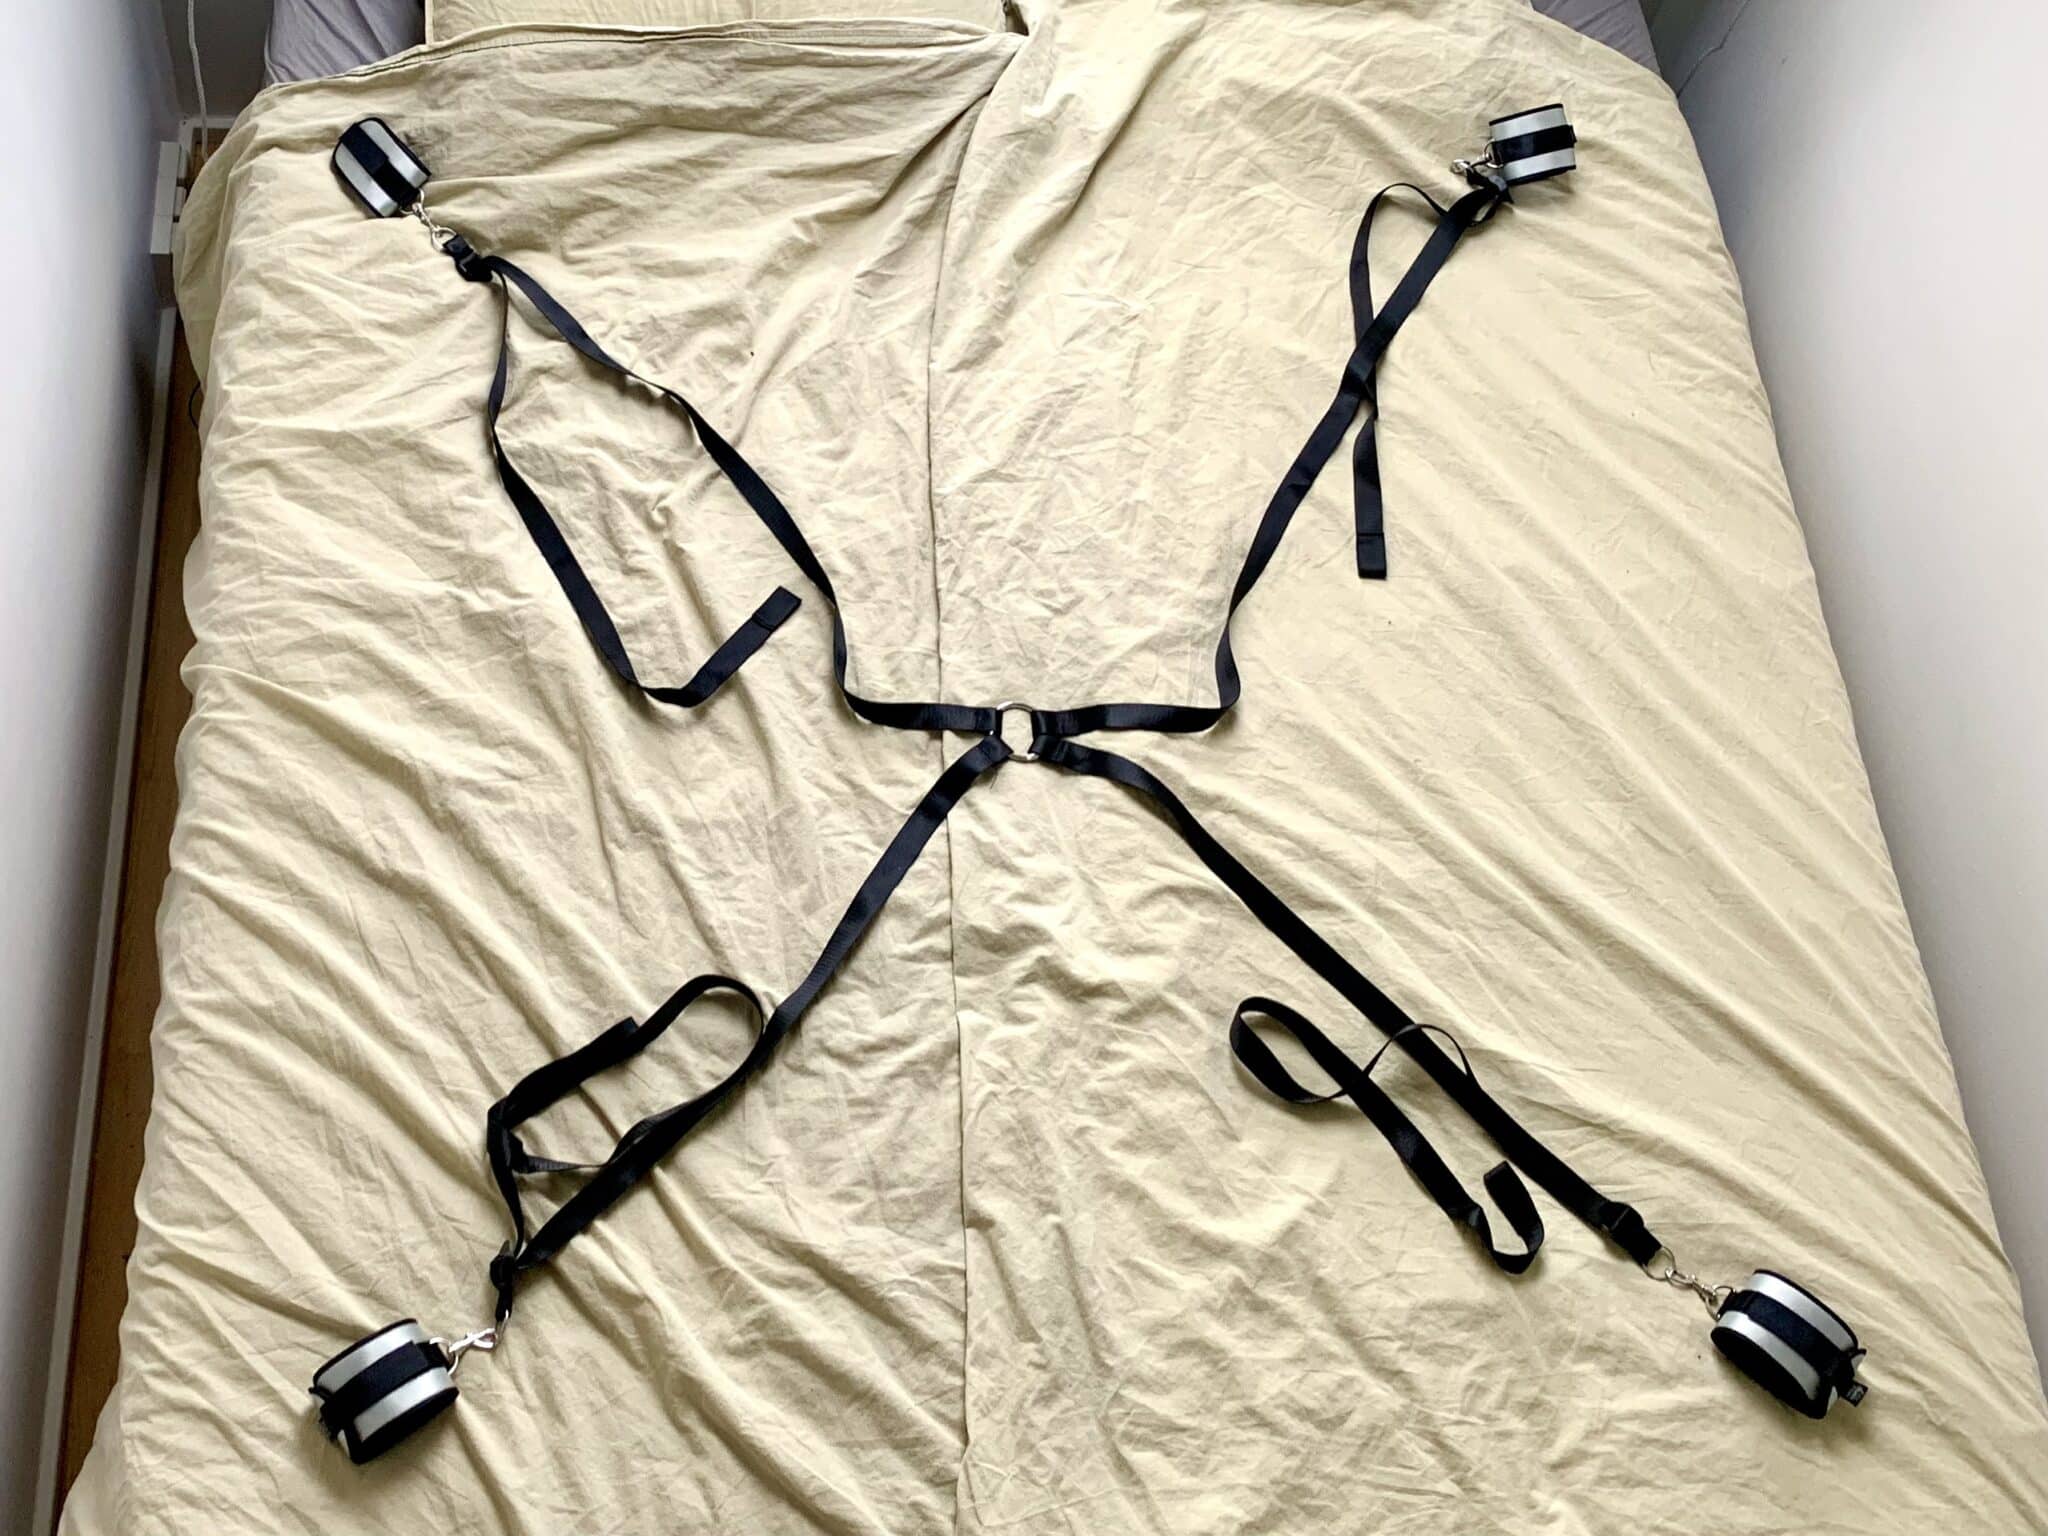 Fifty Shades of Grey Hard Limits Bed Restraint Kit. Slide 4